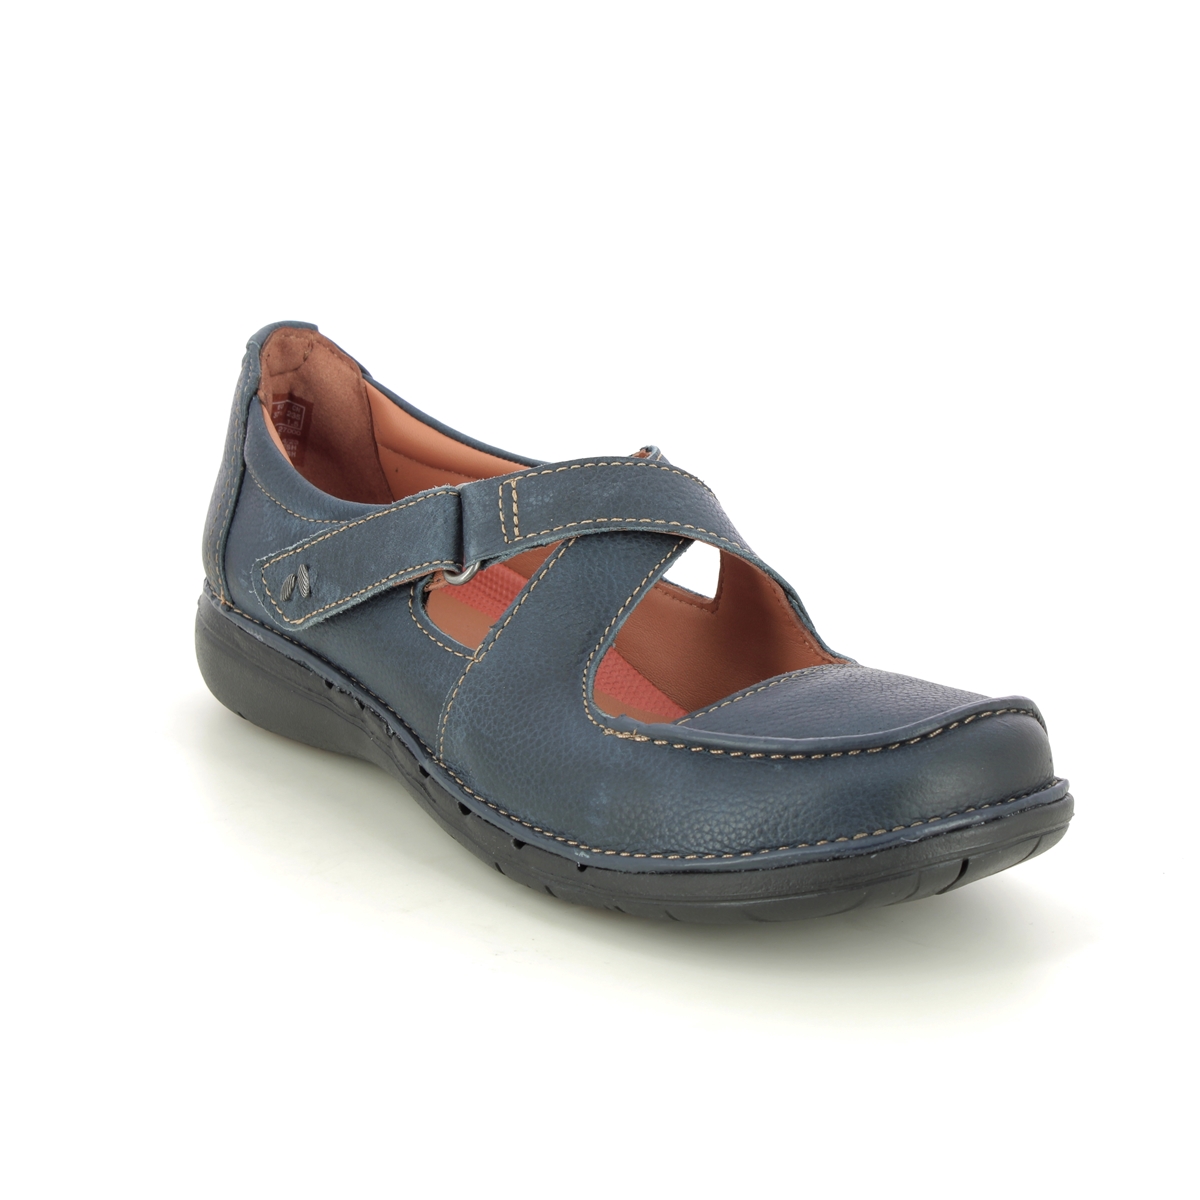 Clarks Un Loop Strap Navy Leather Womens Mary Jane Shoes 7497-24D